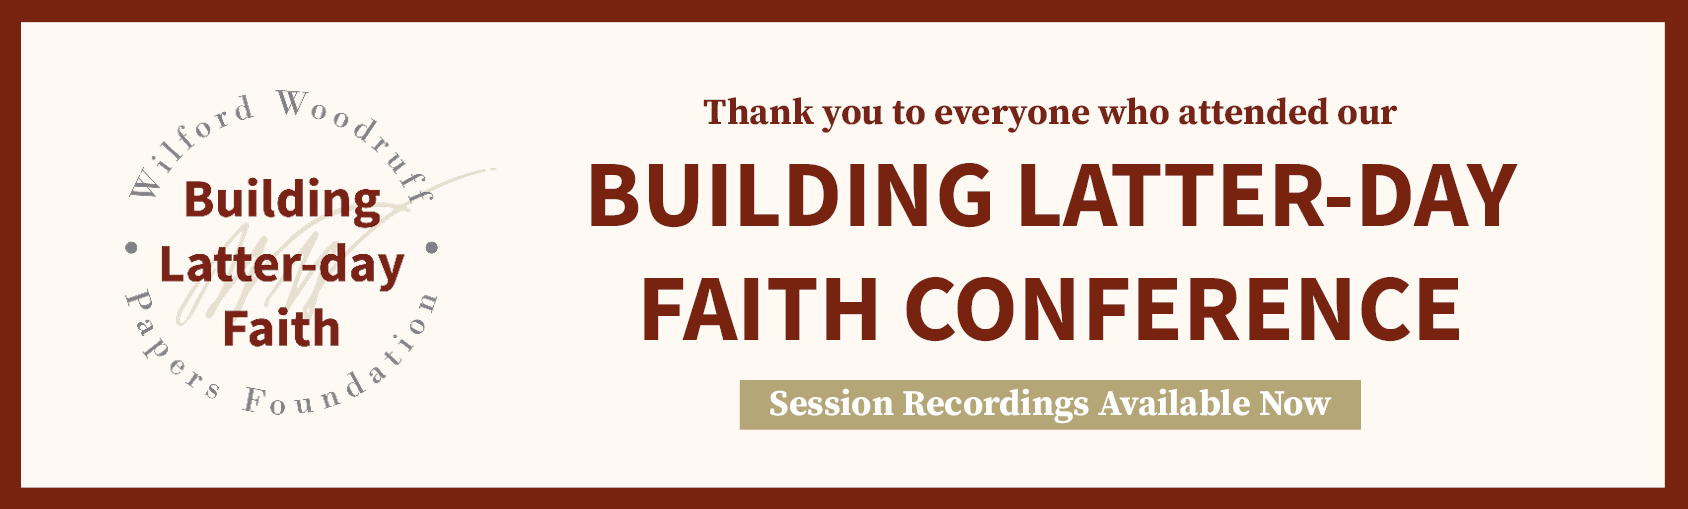 Conference Recordings Available